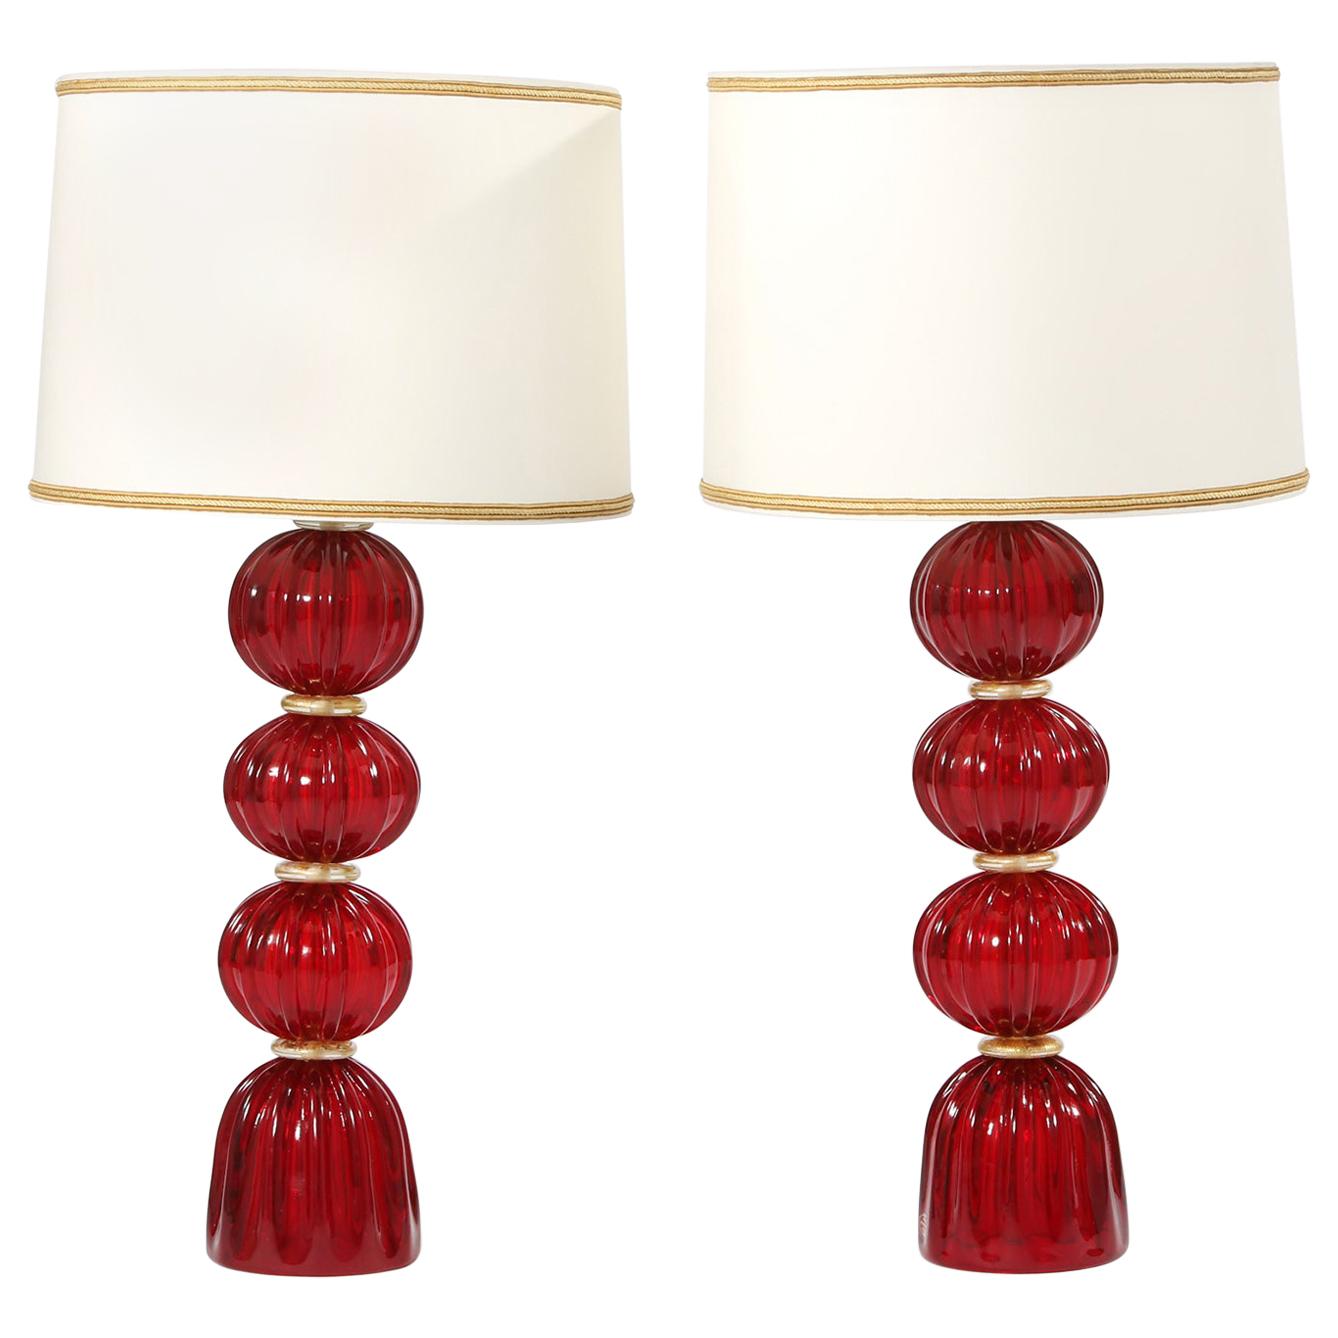 Very Exquisite Pair of Murano Glass Table Lamps